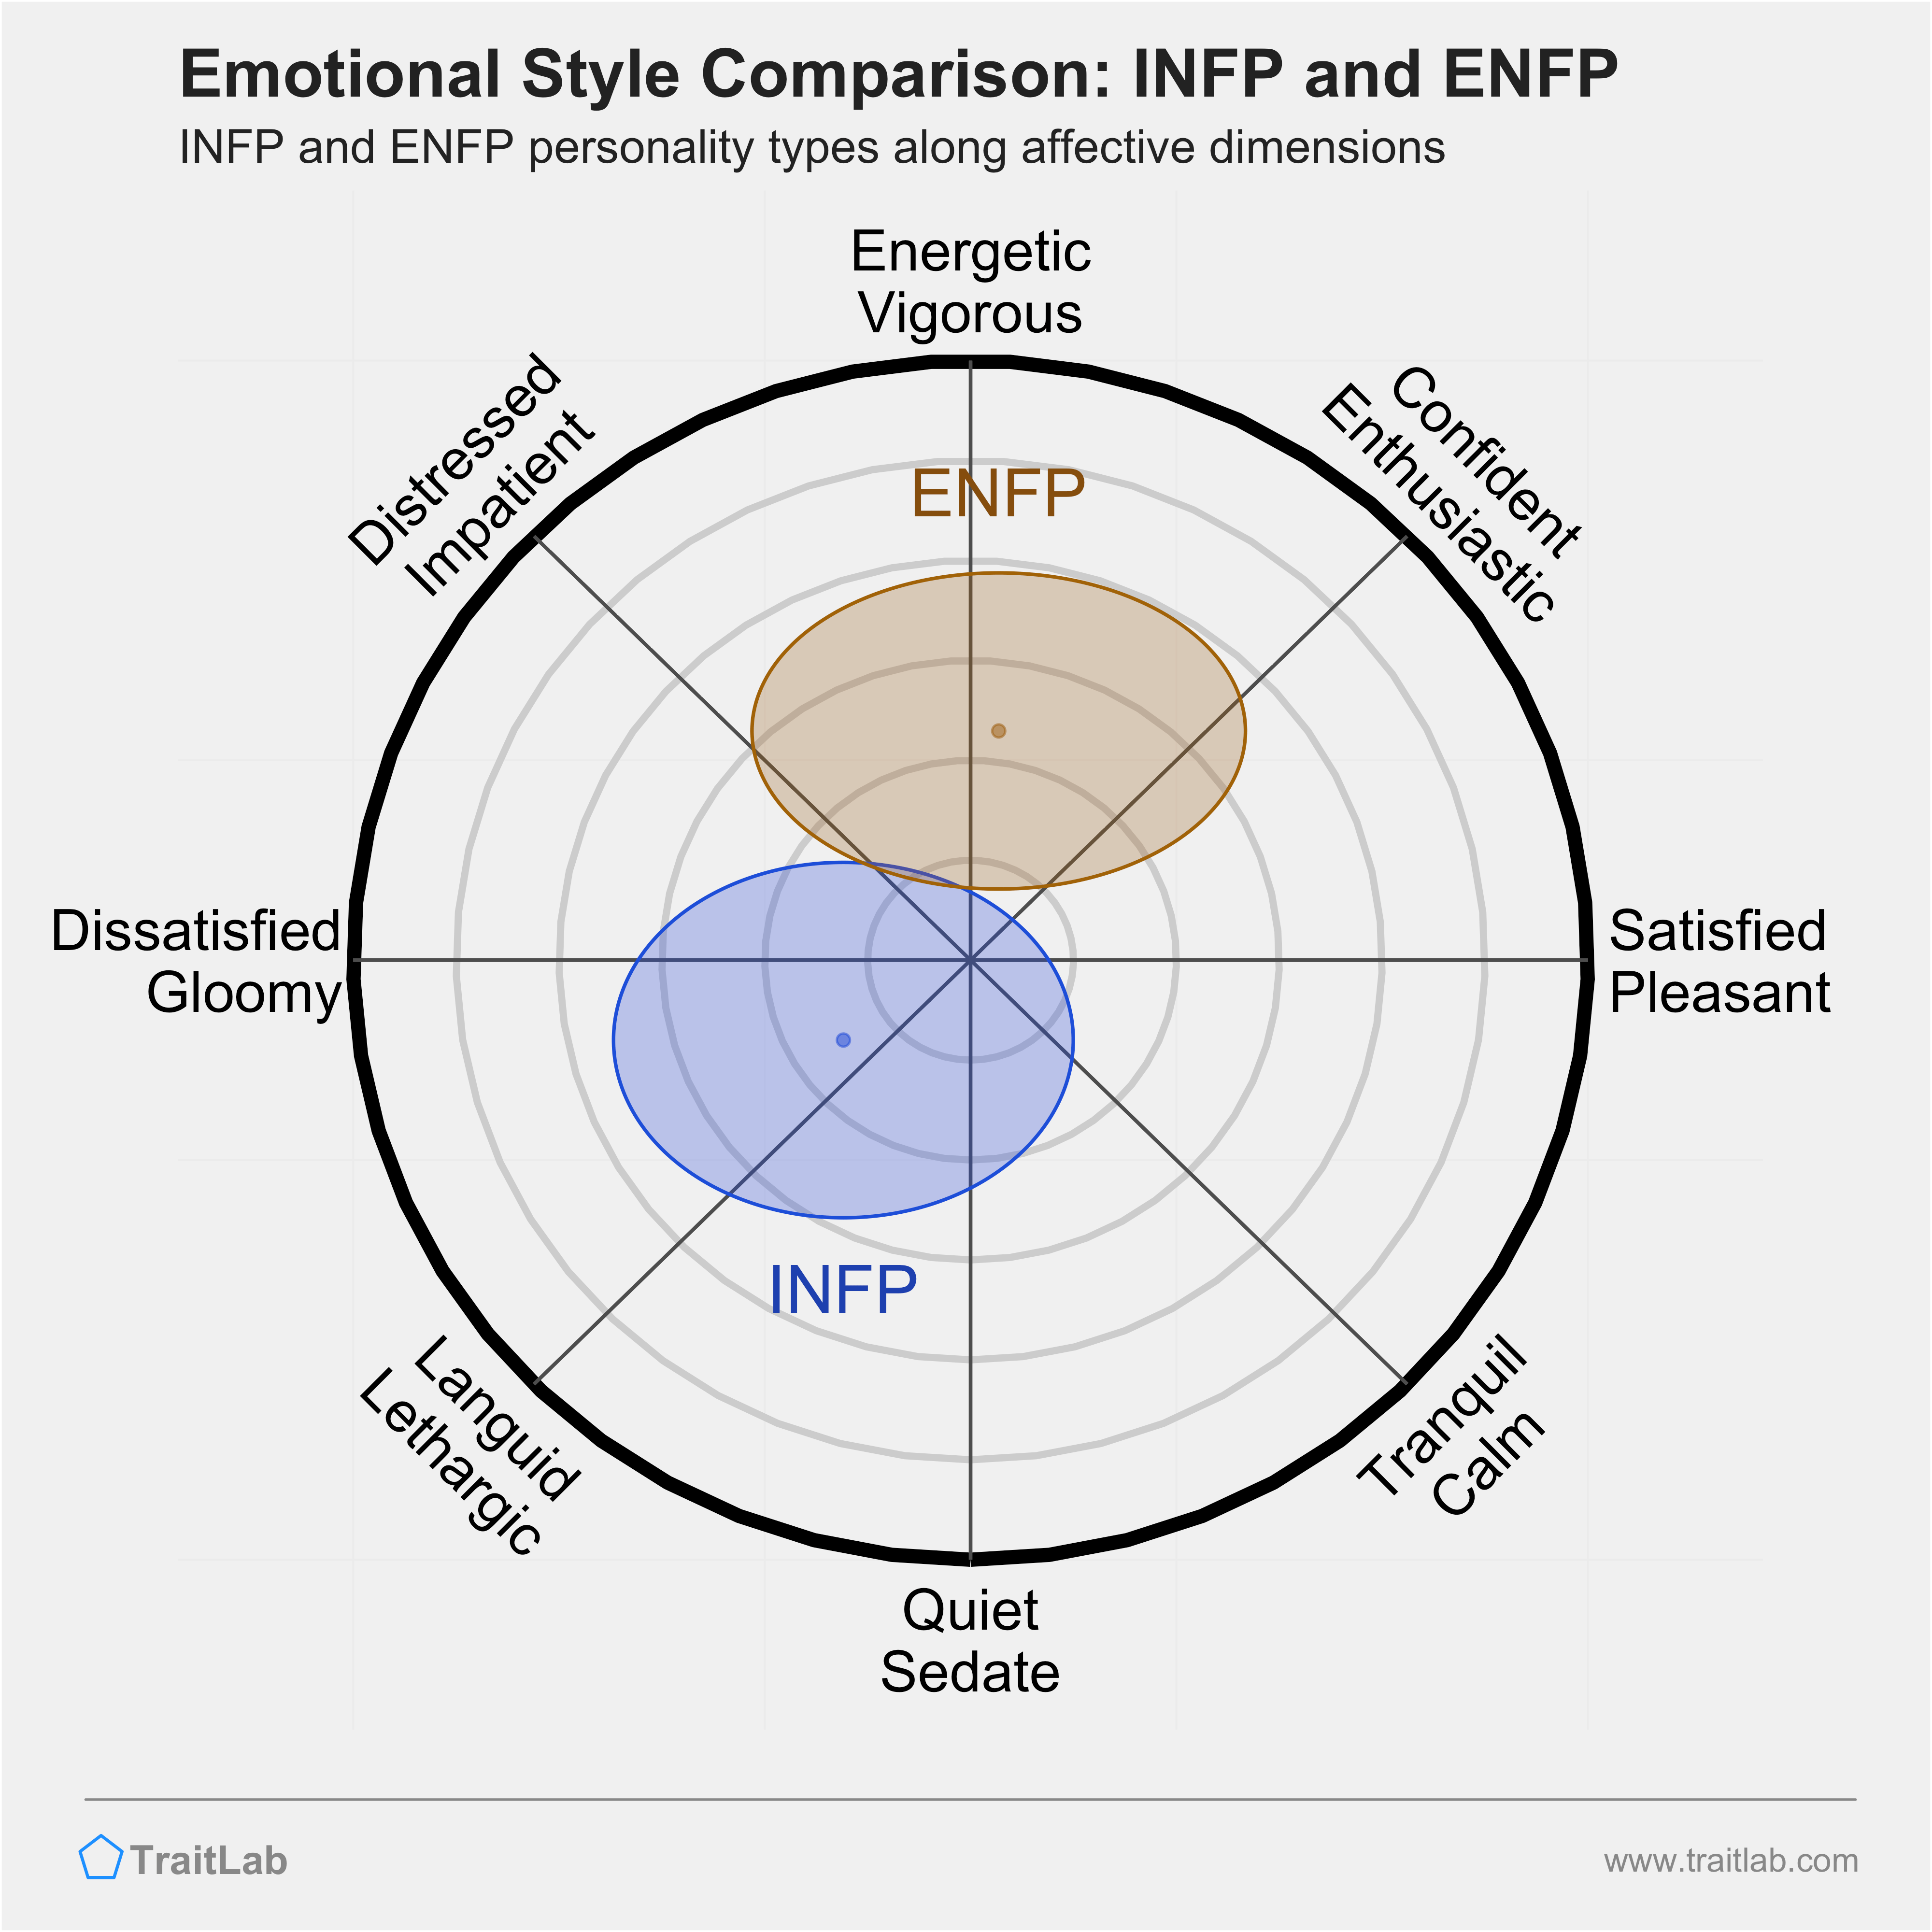 INFP and ENFP comparison across emotional (affective) dimensions